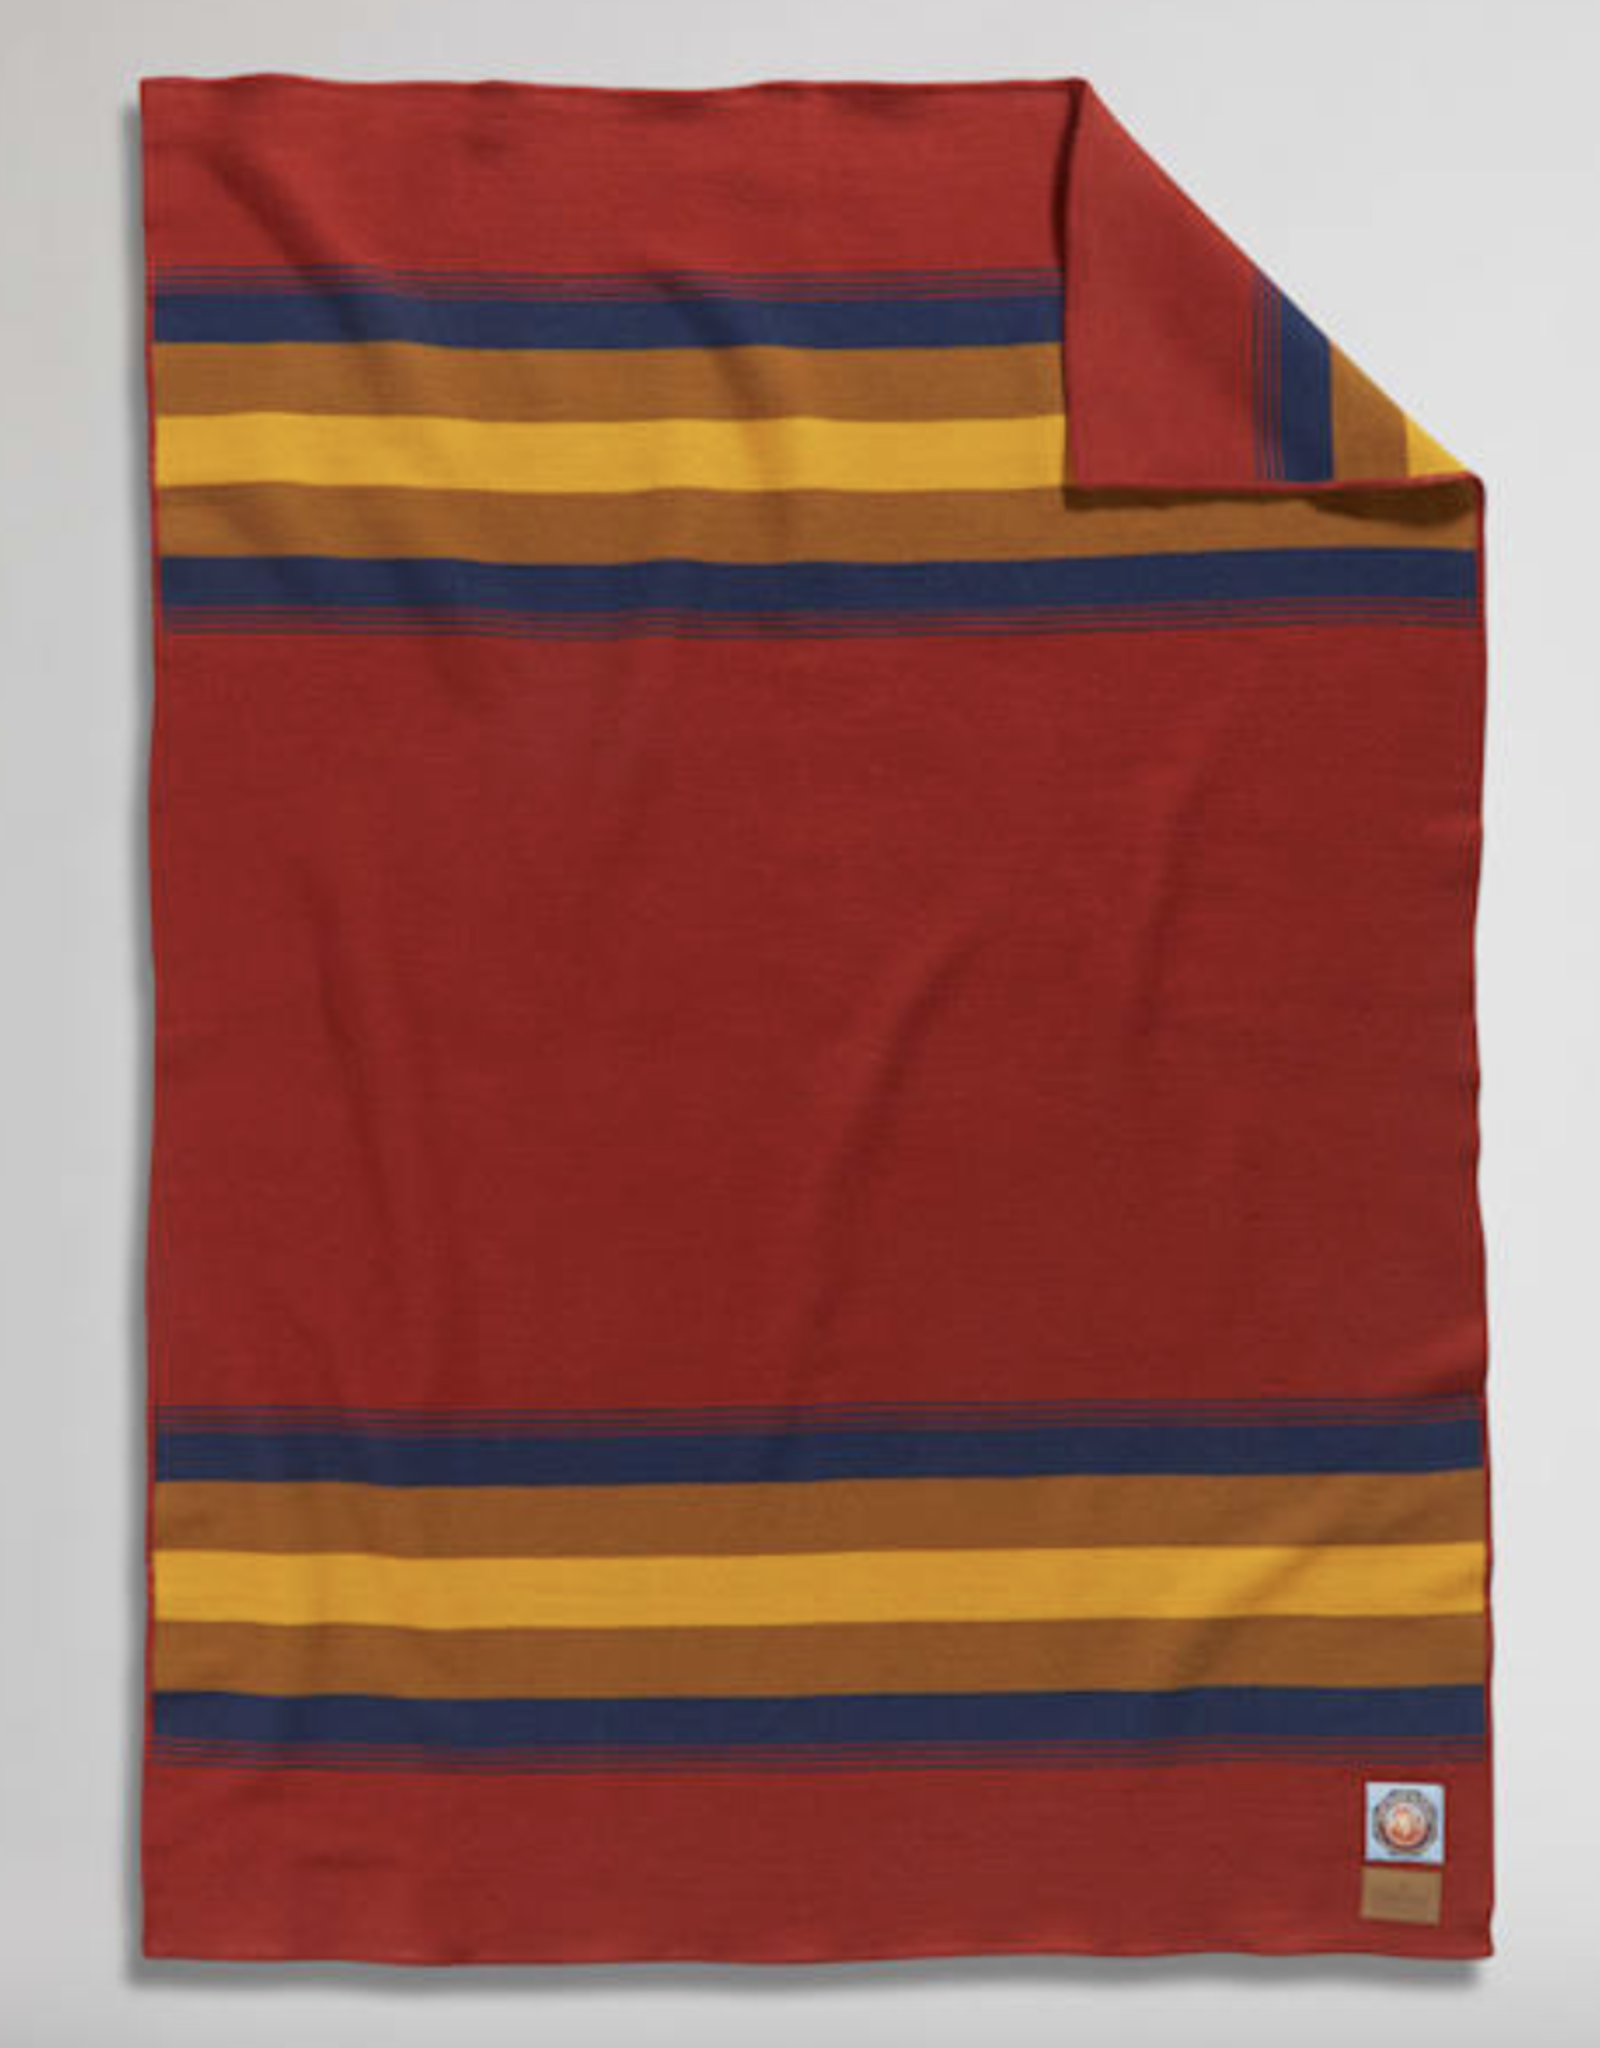 Pendleton National Park Throw with Carrier